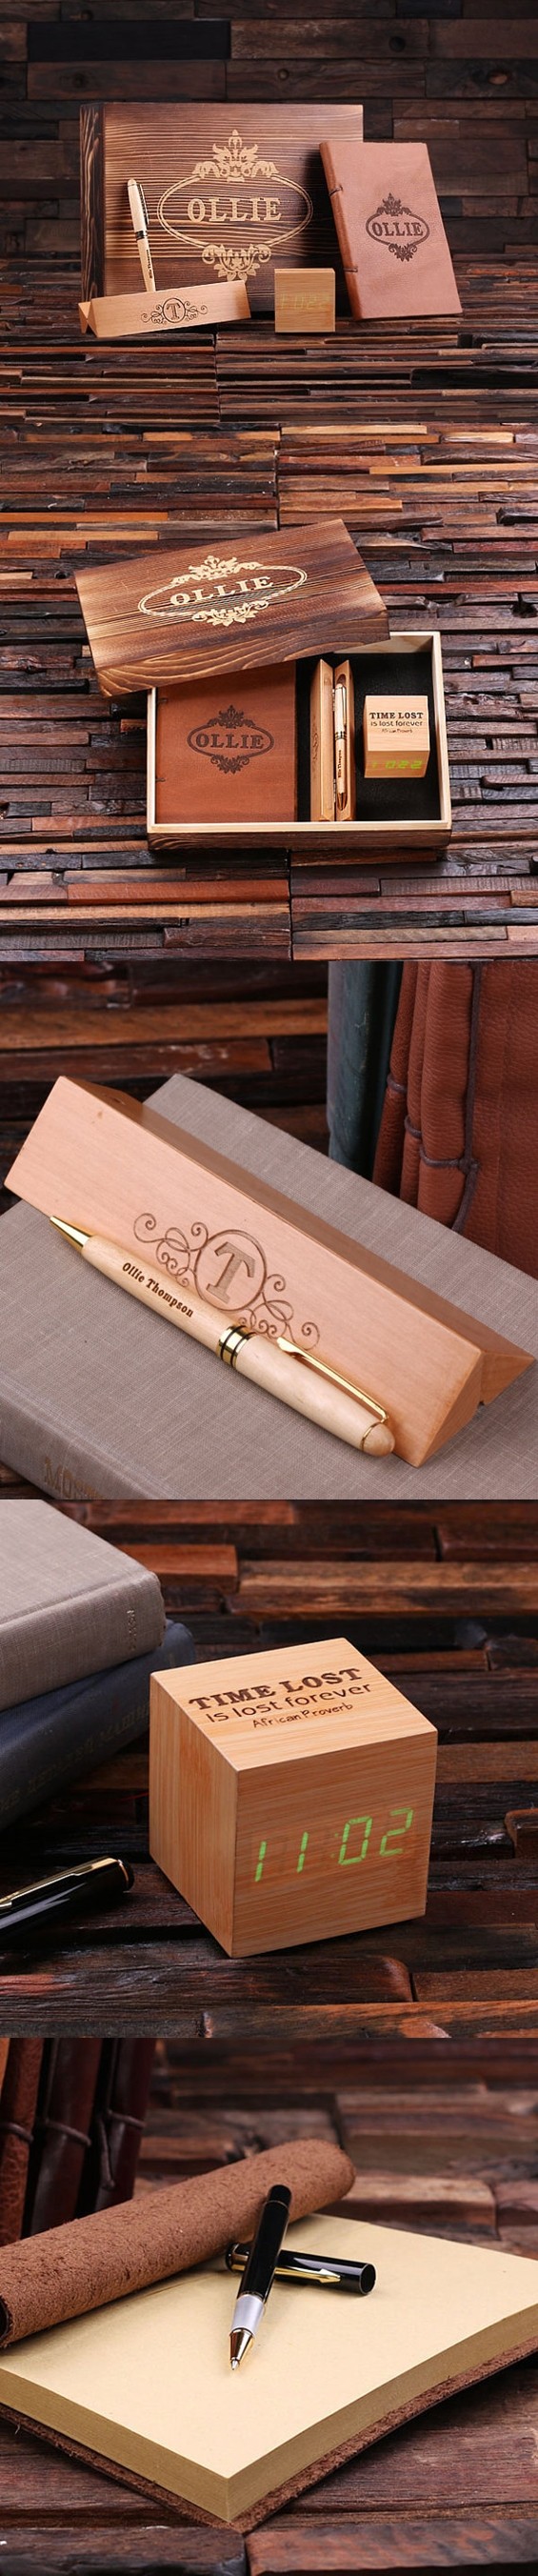 Personalized Gift-Set with Pen Set, Leather Journal & Digital Wood Clock